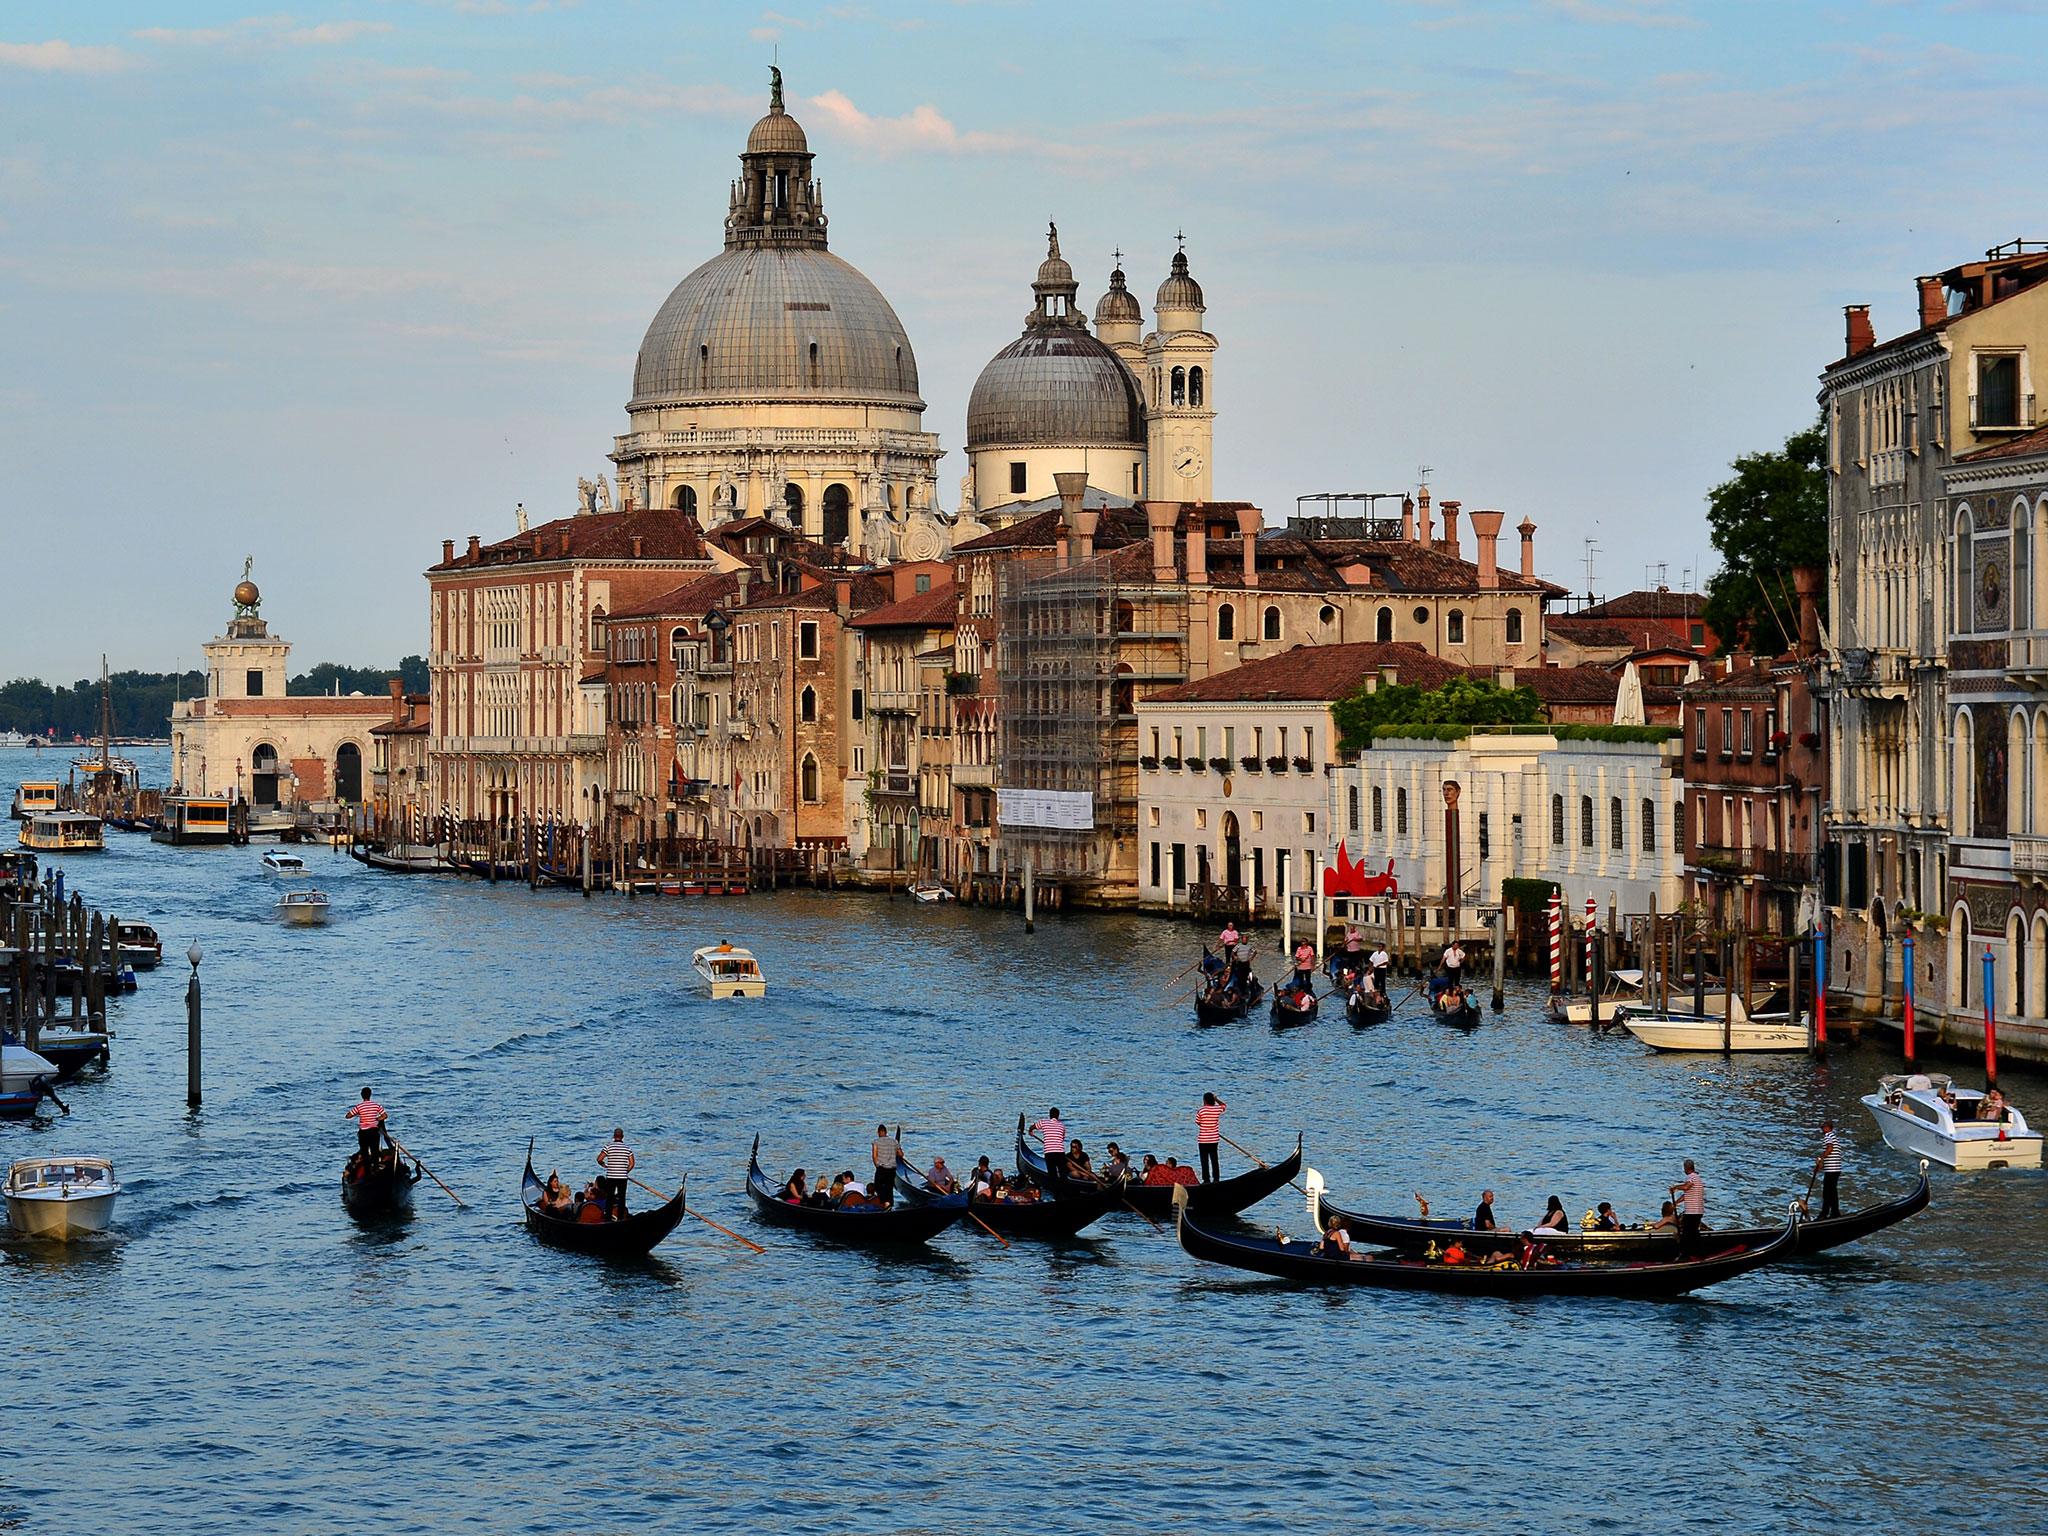 No new hotels will be built in Venice